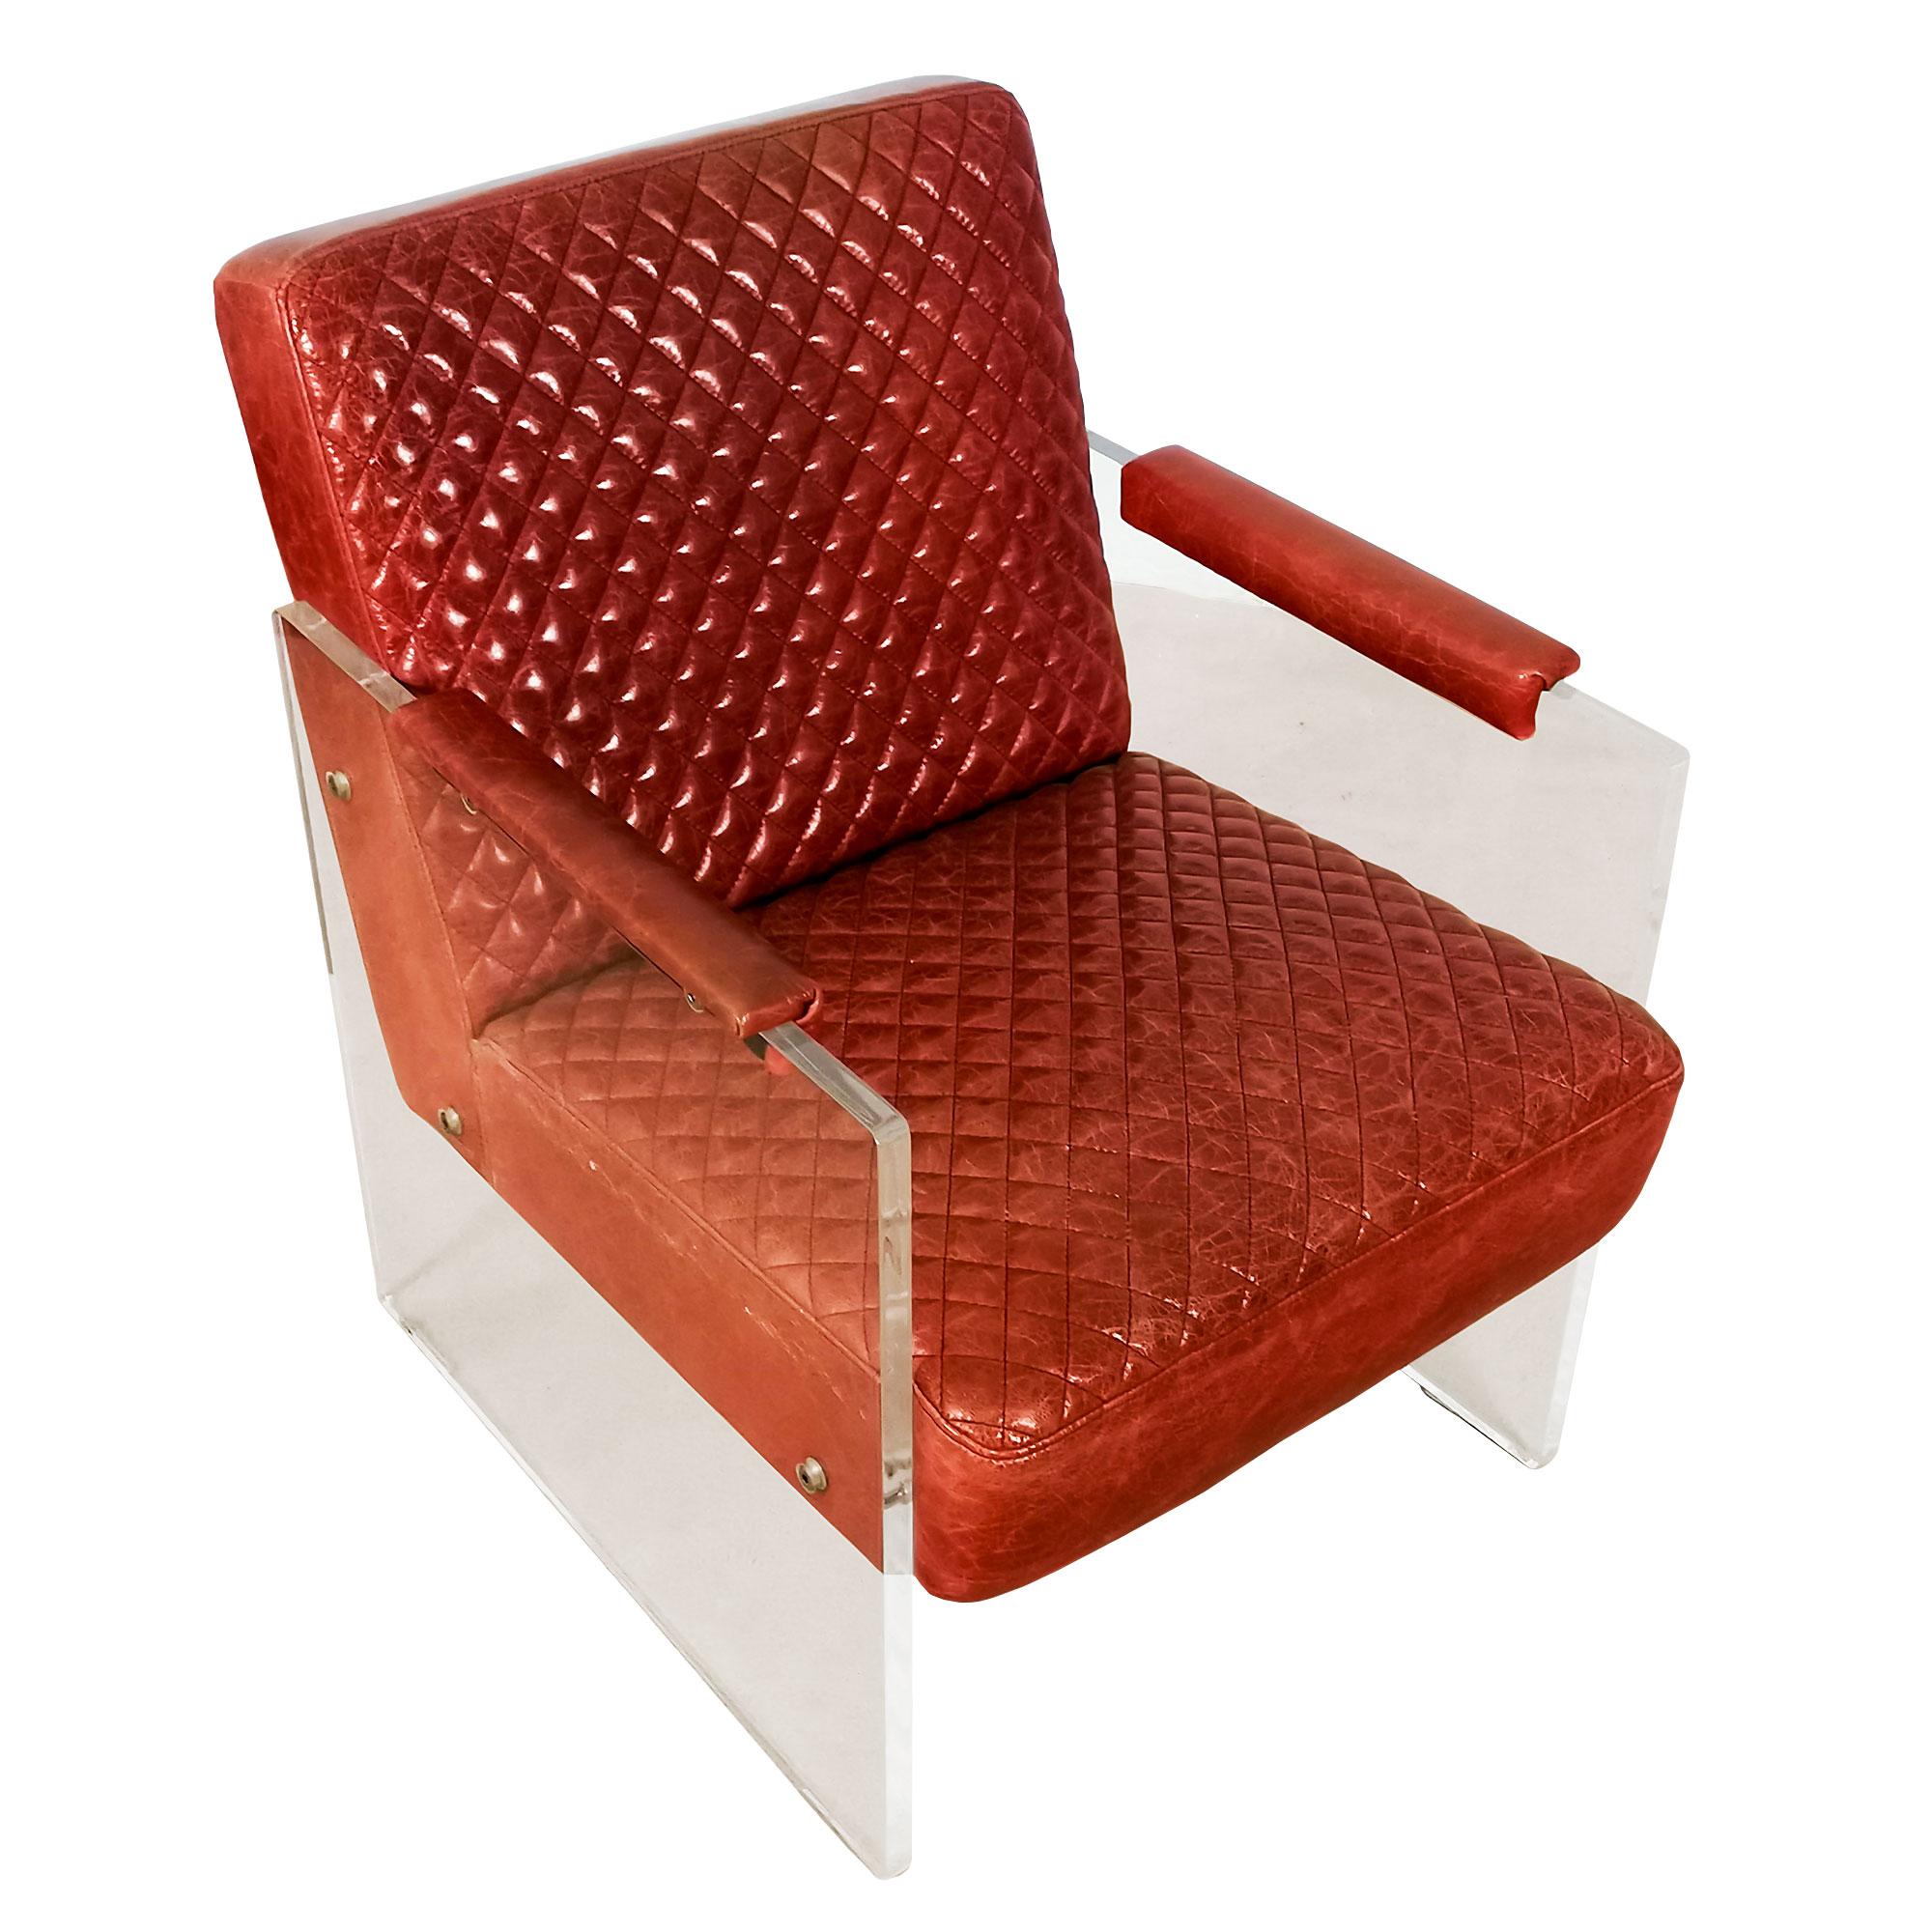 Pair of Modern Leather and Plexiglass Armchairs, France, 1980 For Sale 1